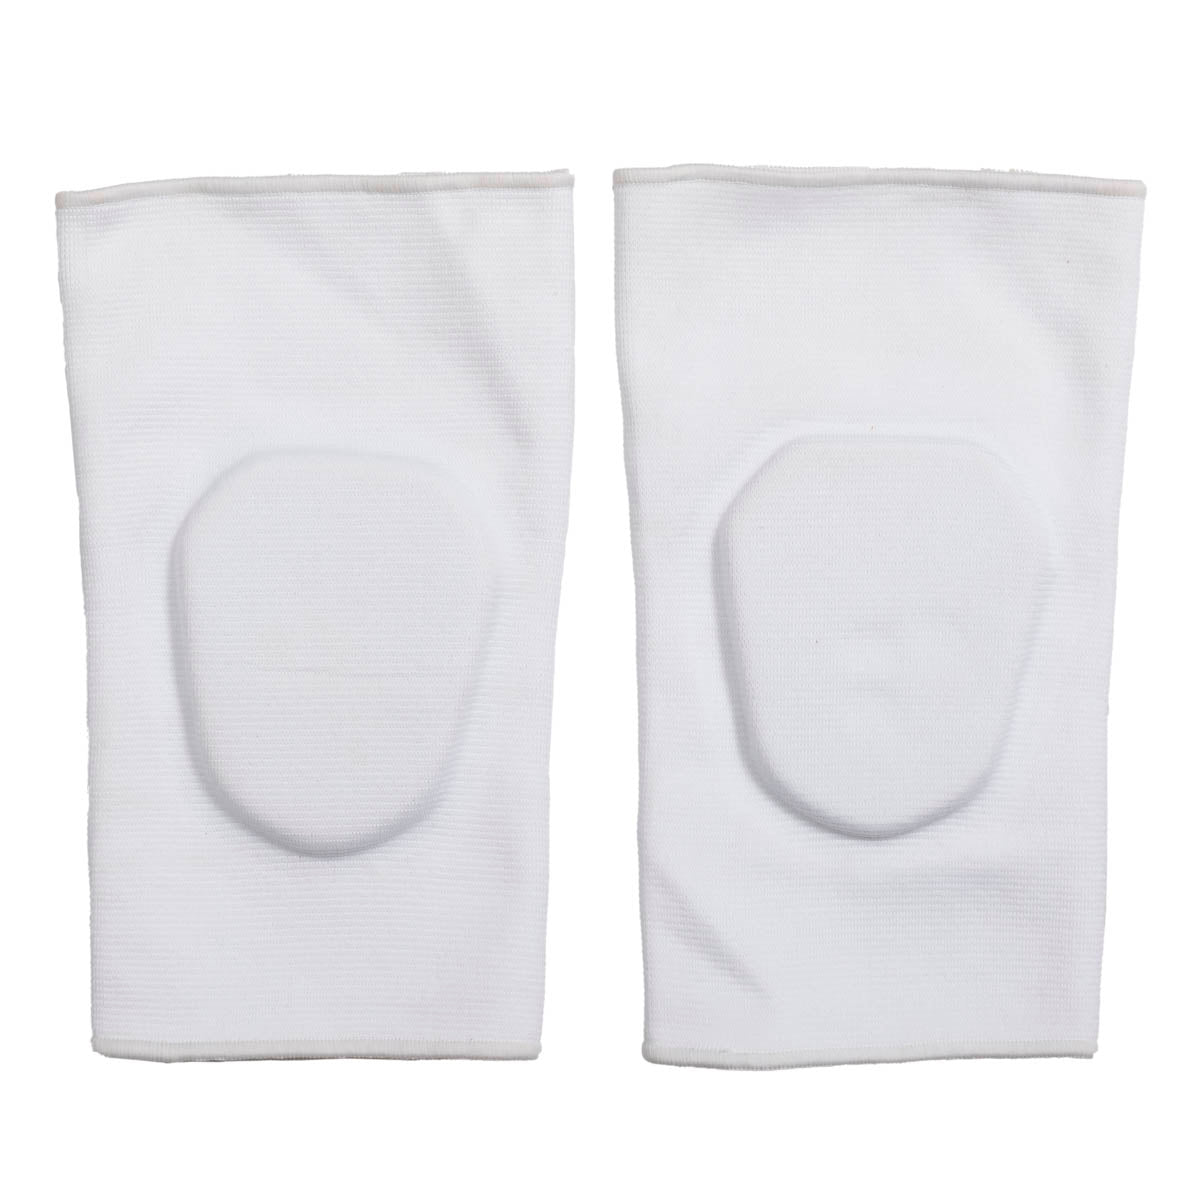 Versatile Knee Pads Multiple Colors for Workout, Rollerblading, Halloween Costumes, and Cosplay Accessories White